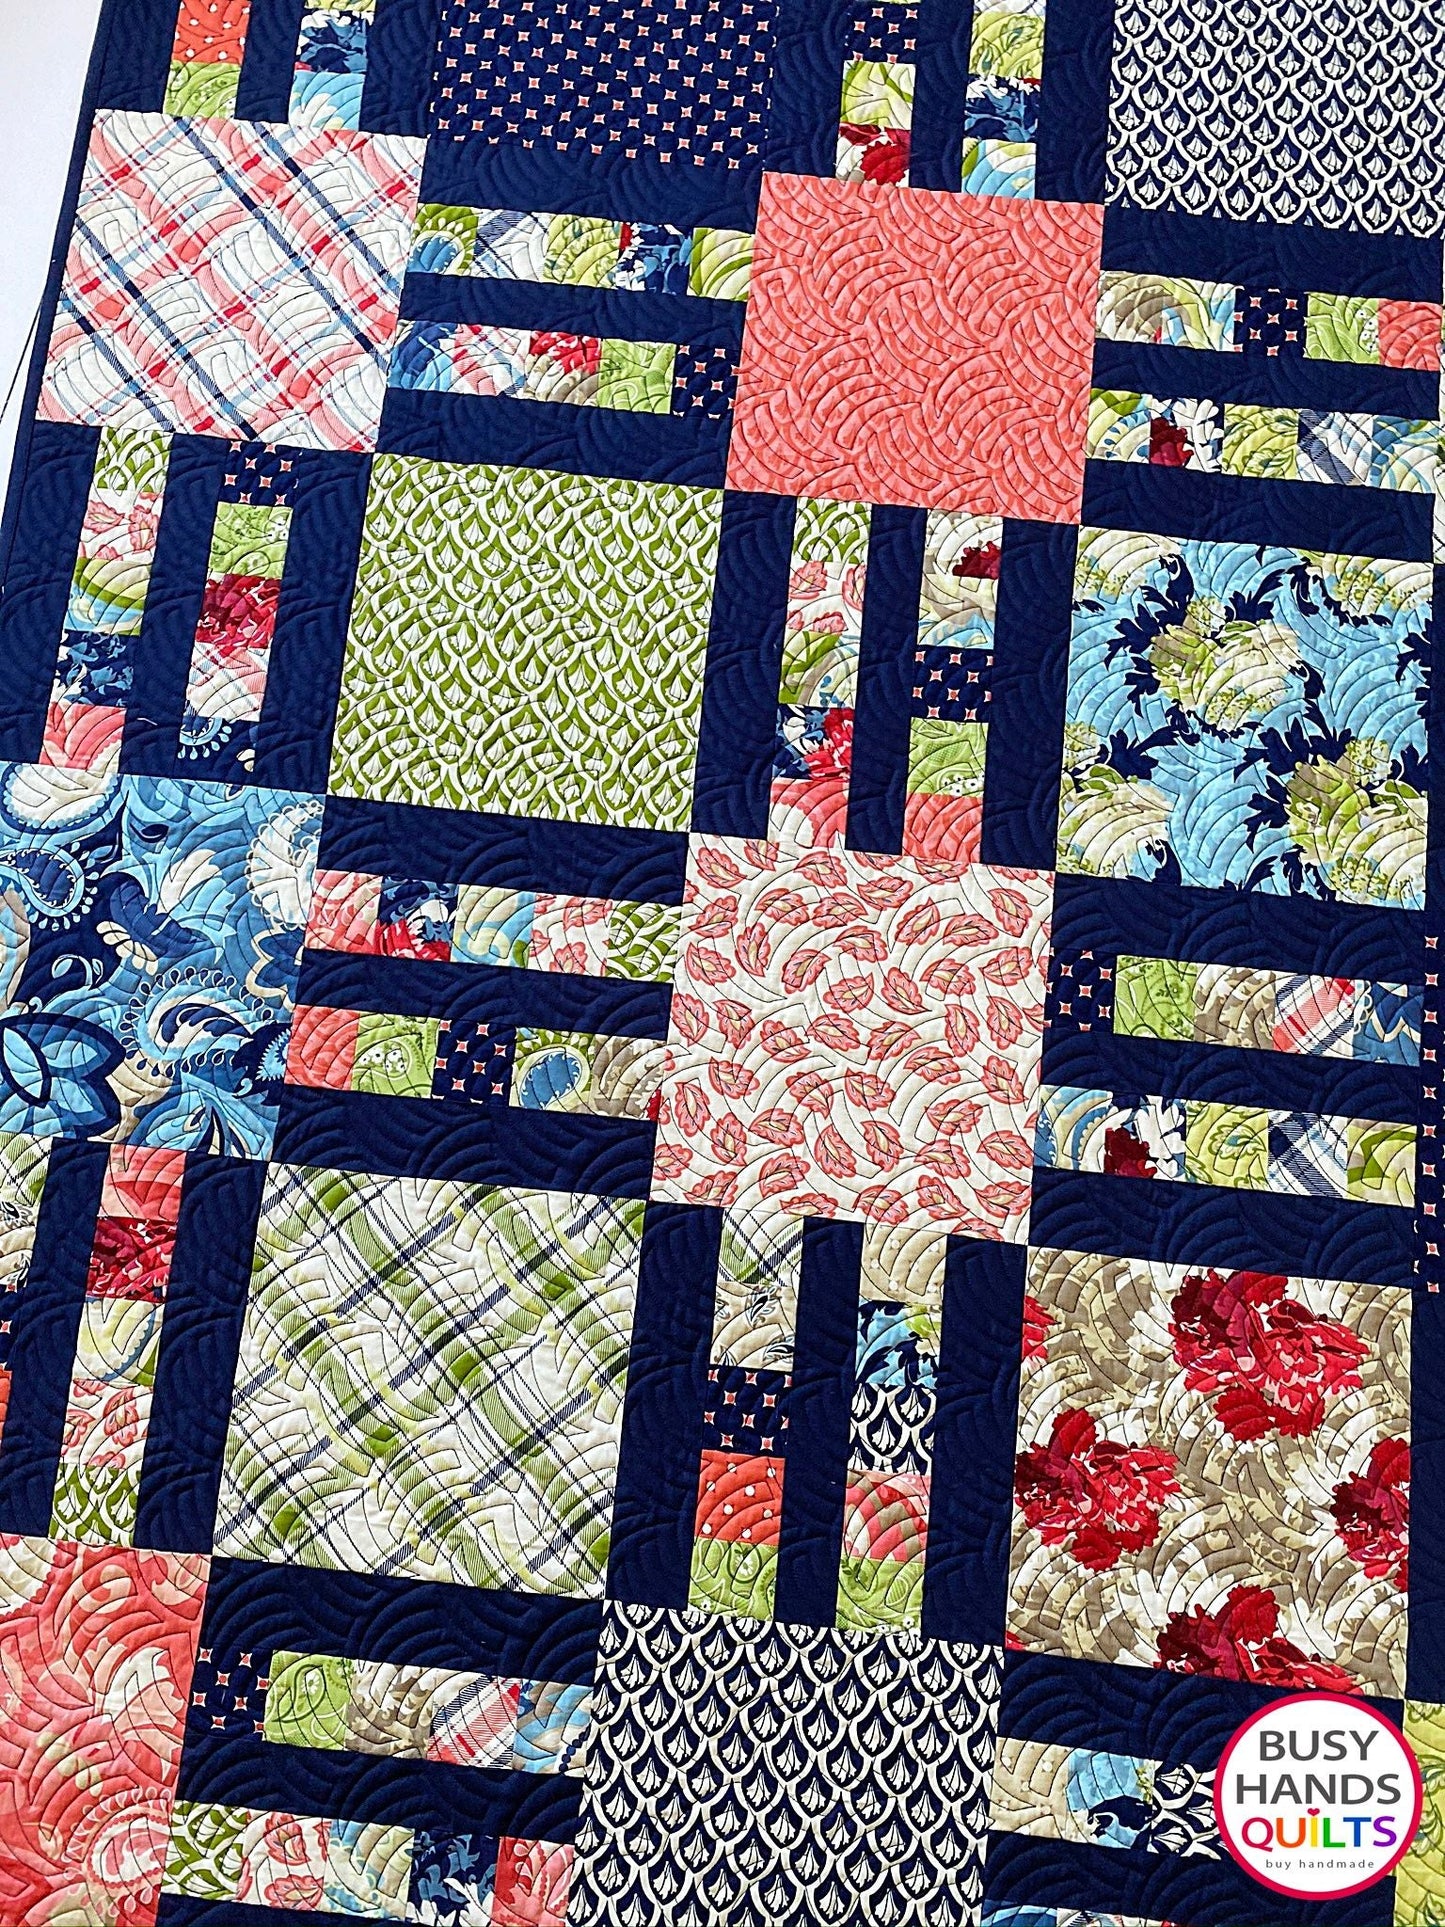 Picket Fence Quilt Pattern PRINTED Busy Hands Quilts {$price}